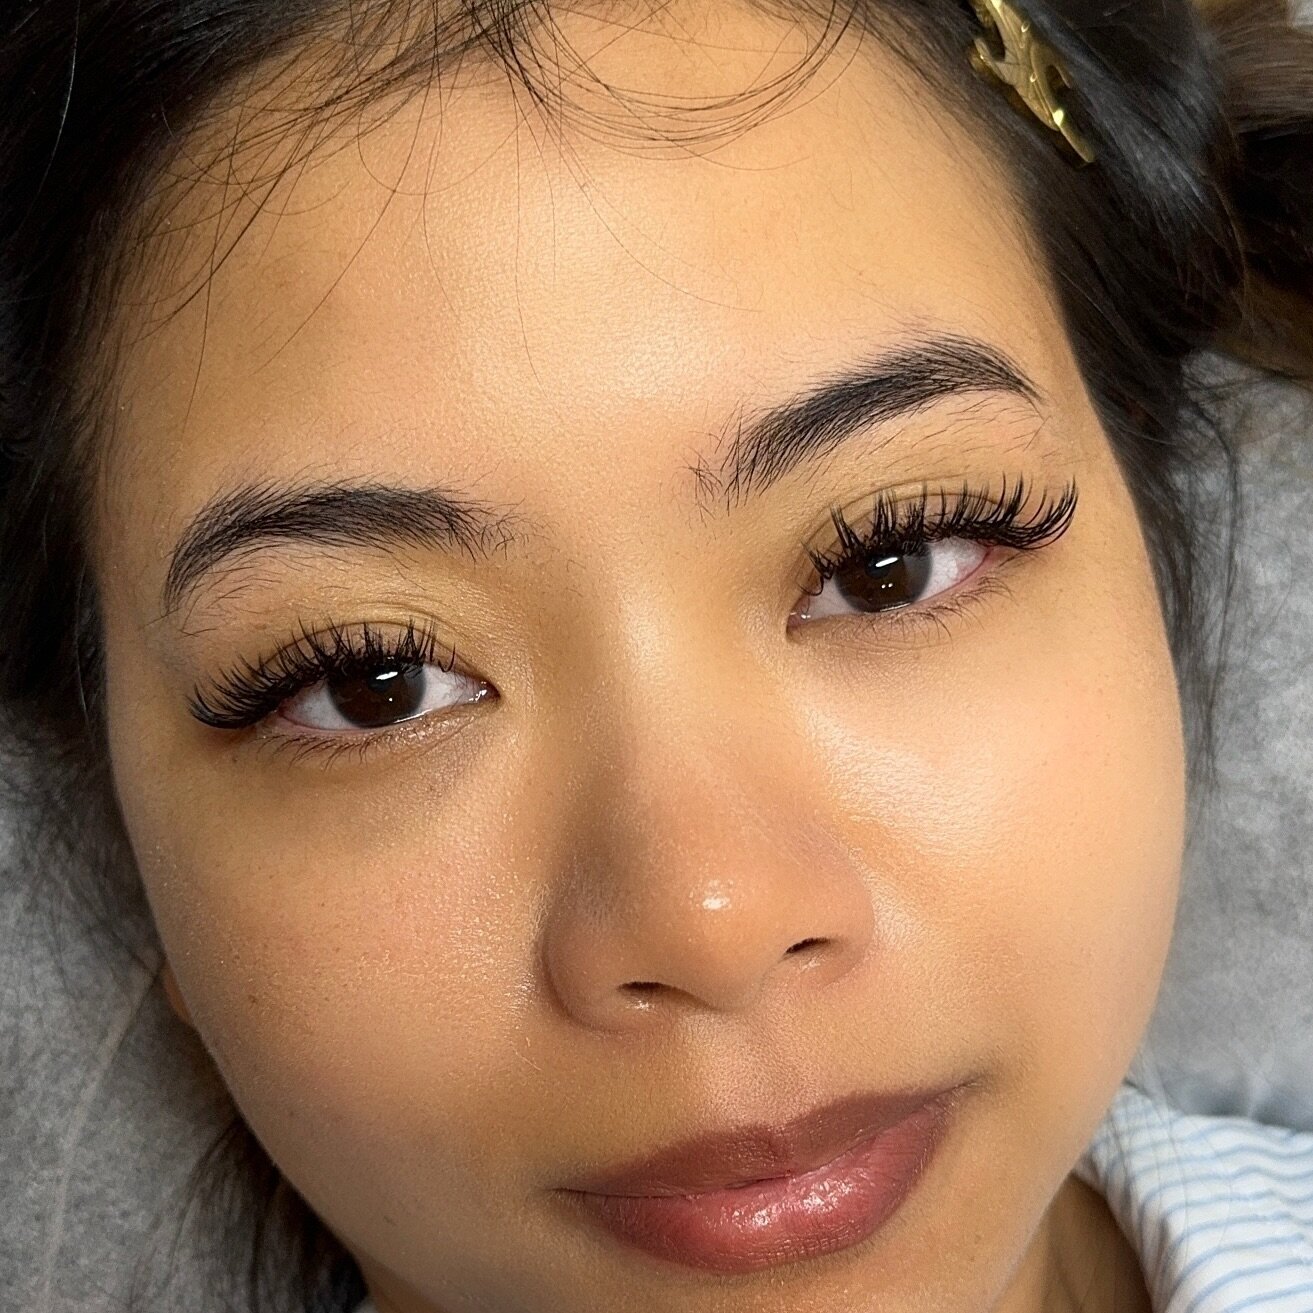 Wet lash look has taken over 👀🥰 Book this stunning set with Prissela ✨few appointments available this week!!
Use code PRISSELA25 for 25% off all lash services #wetlashlook#wetlashextensions#bestlashesinmelbourne#prahranlashes#prahran#bestsalonsinme